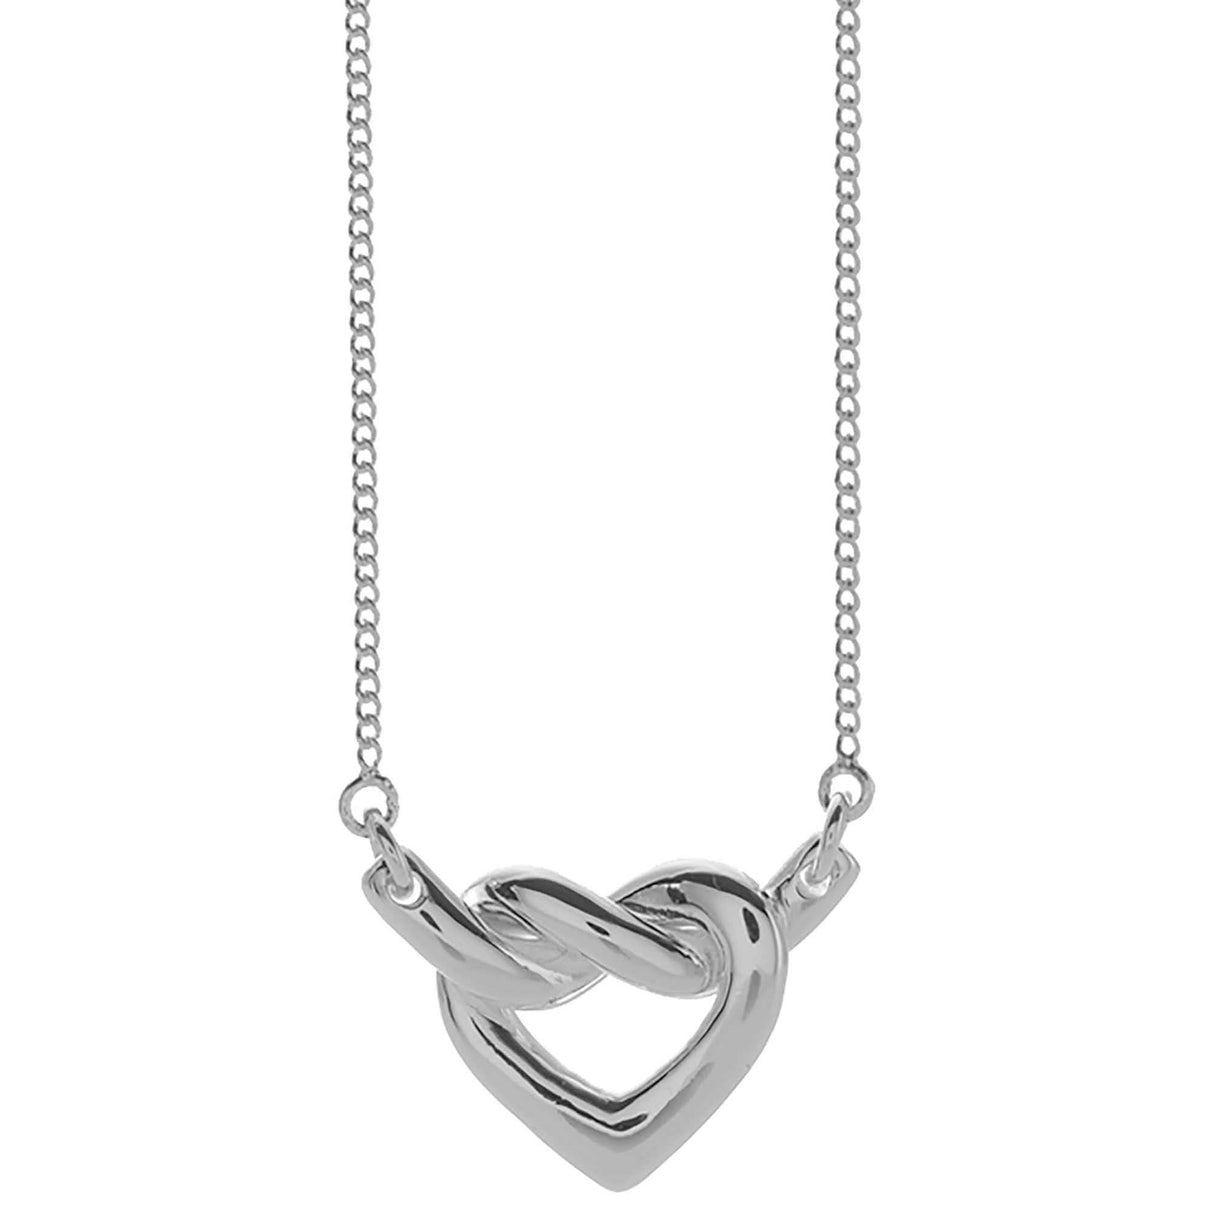 Necklace Love Knot Heart Silver Plated